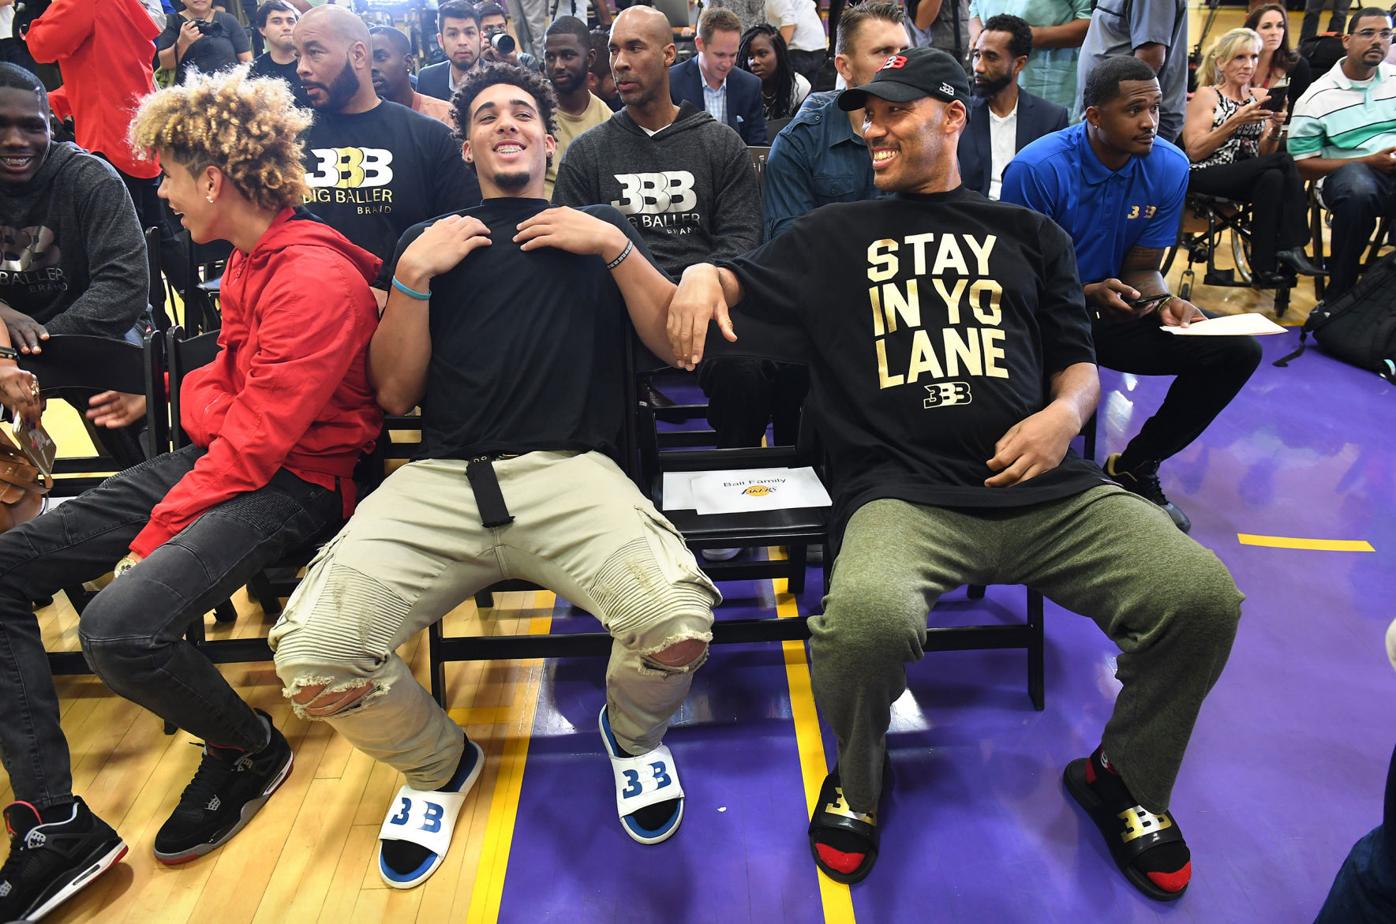 LaVar Ball finally got to pose with the Lakers' championship